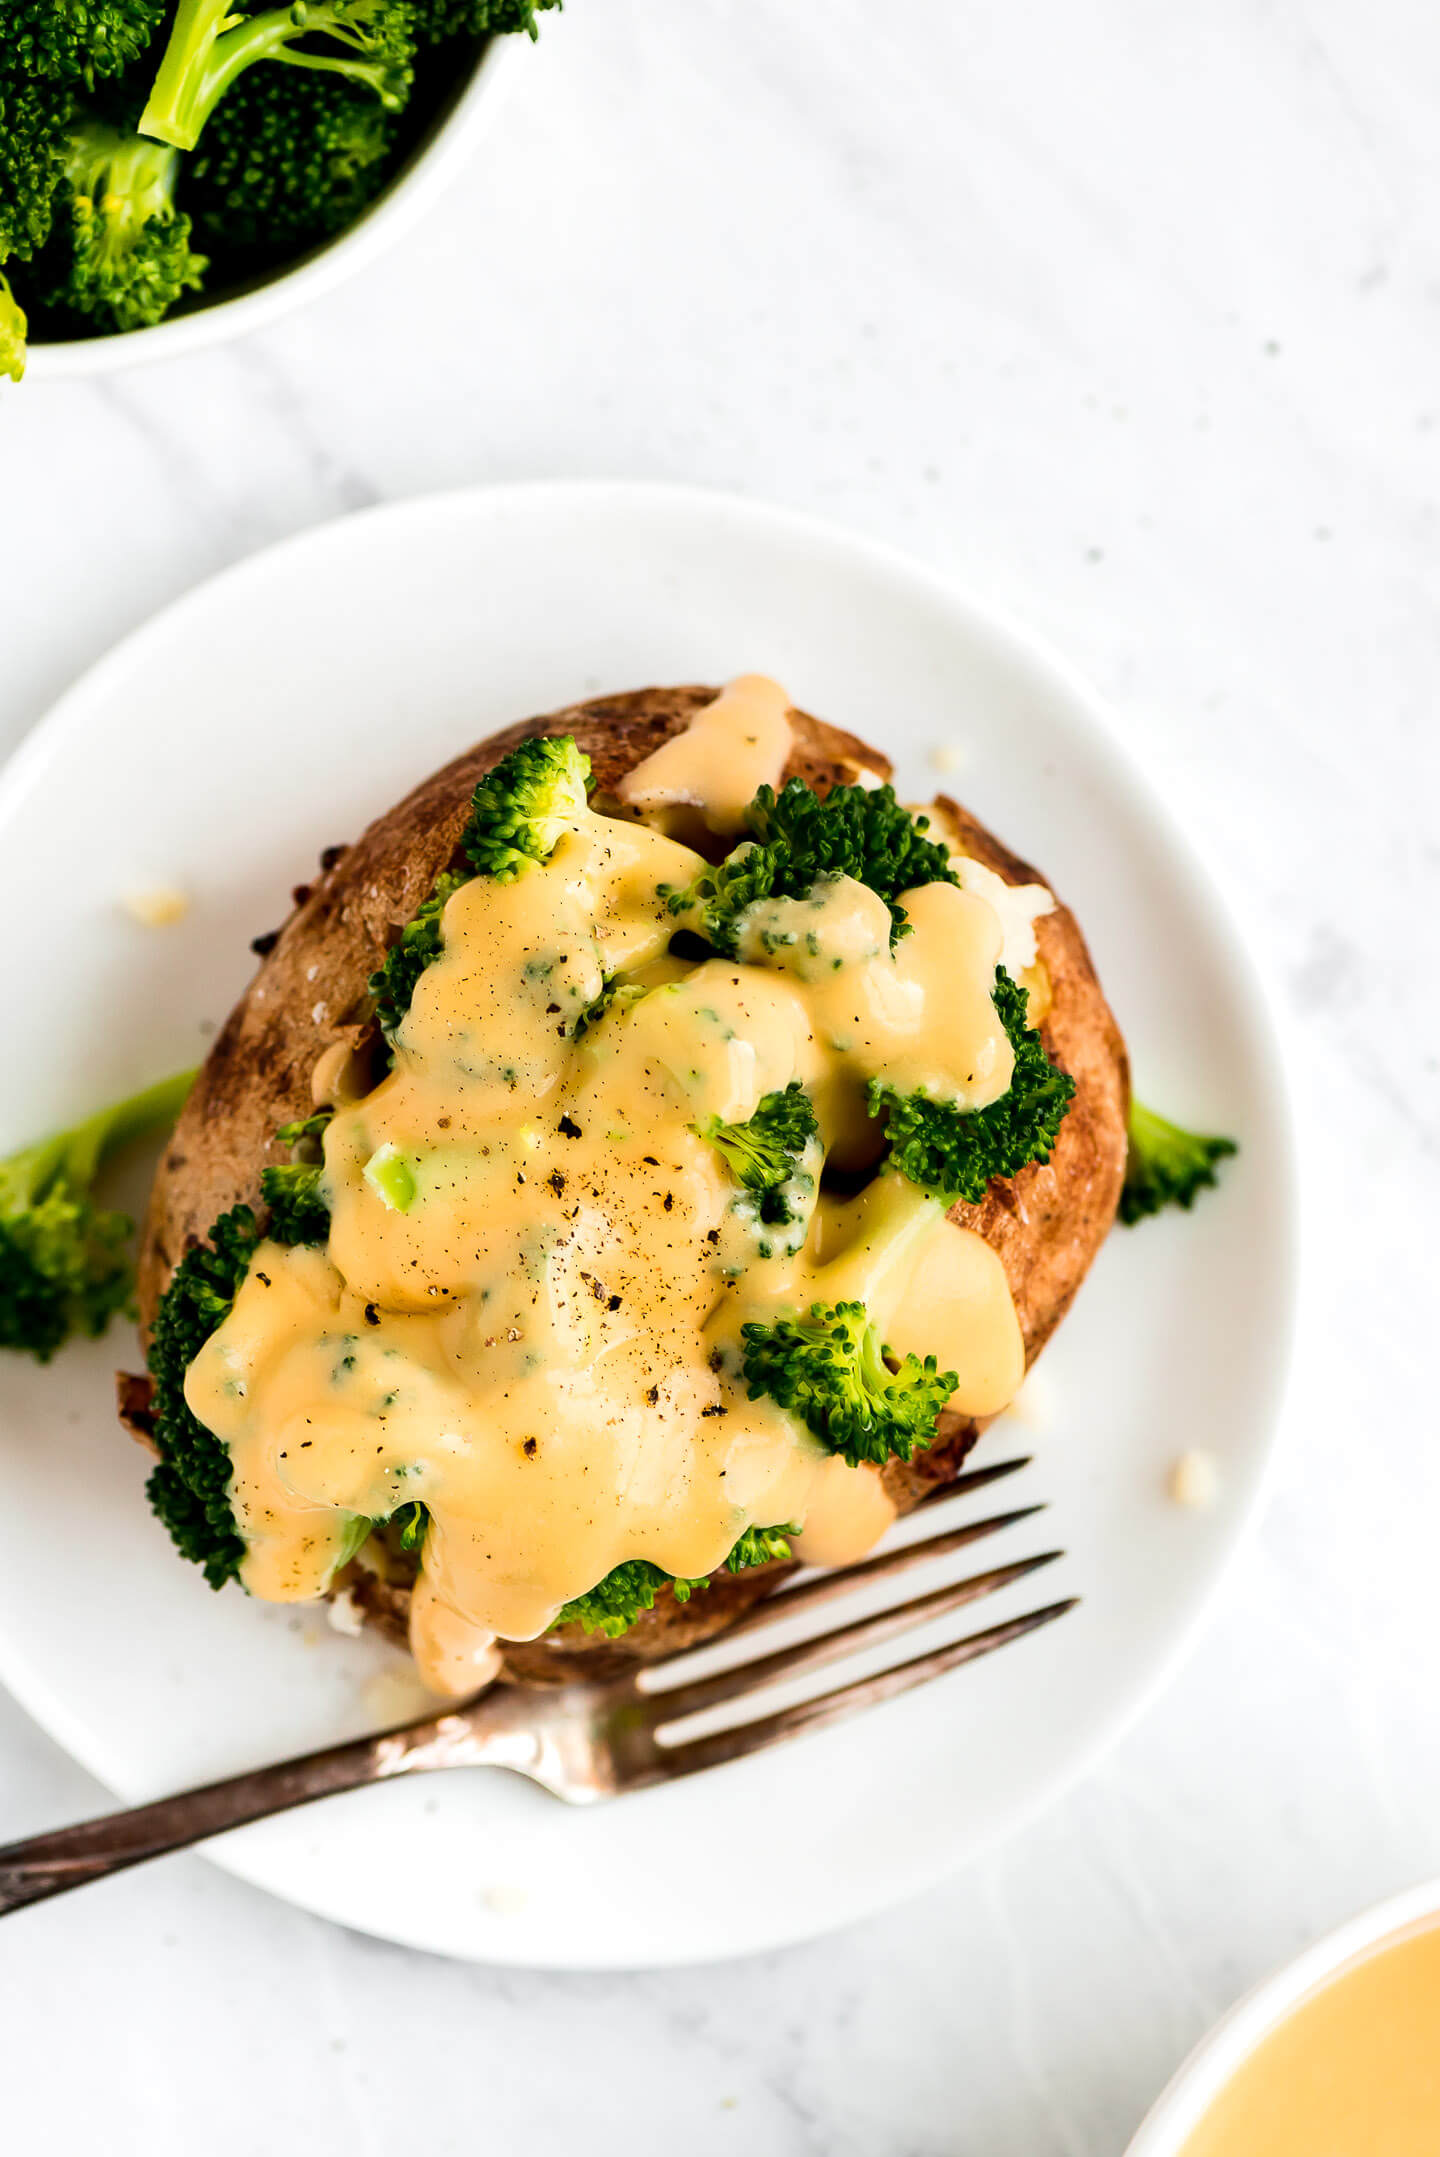 Top view of a baked potato topped with broccoli & cheese sauce.